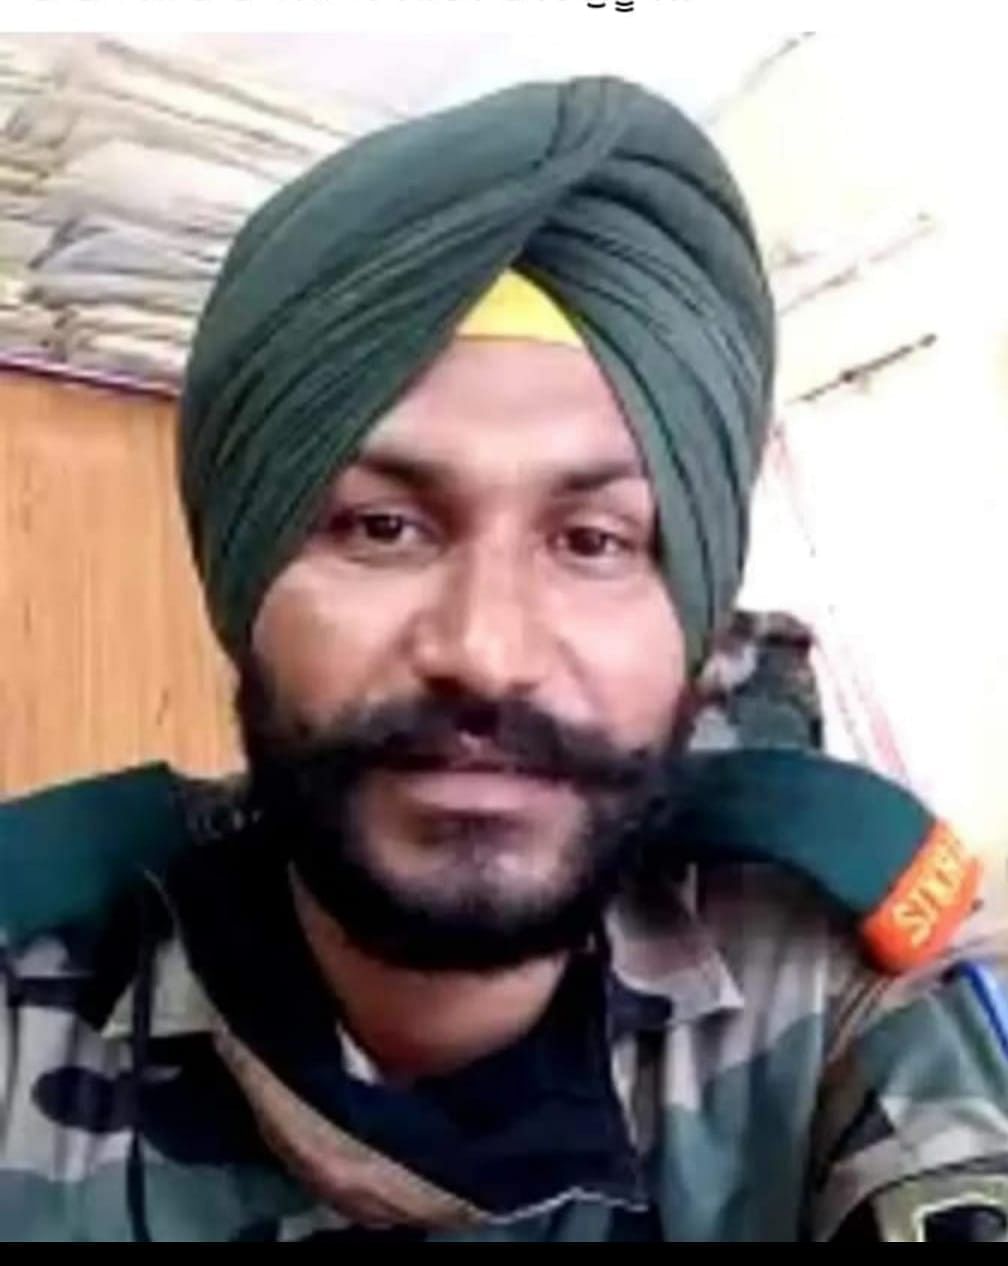 Mandeep Singh was one of the five jawans martyred after an army vehicle was ambushed in J&K's Poonch on 20 April.